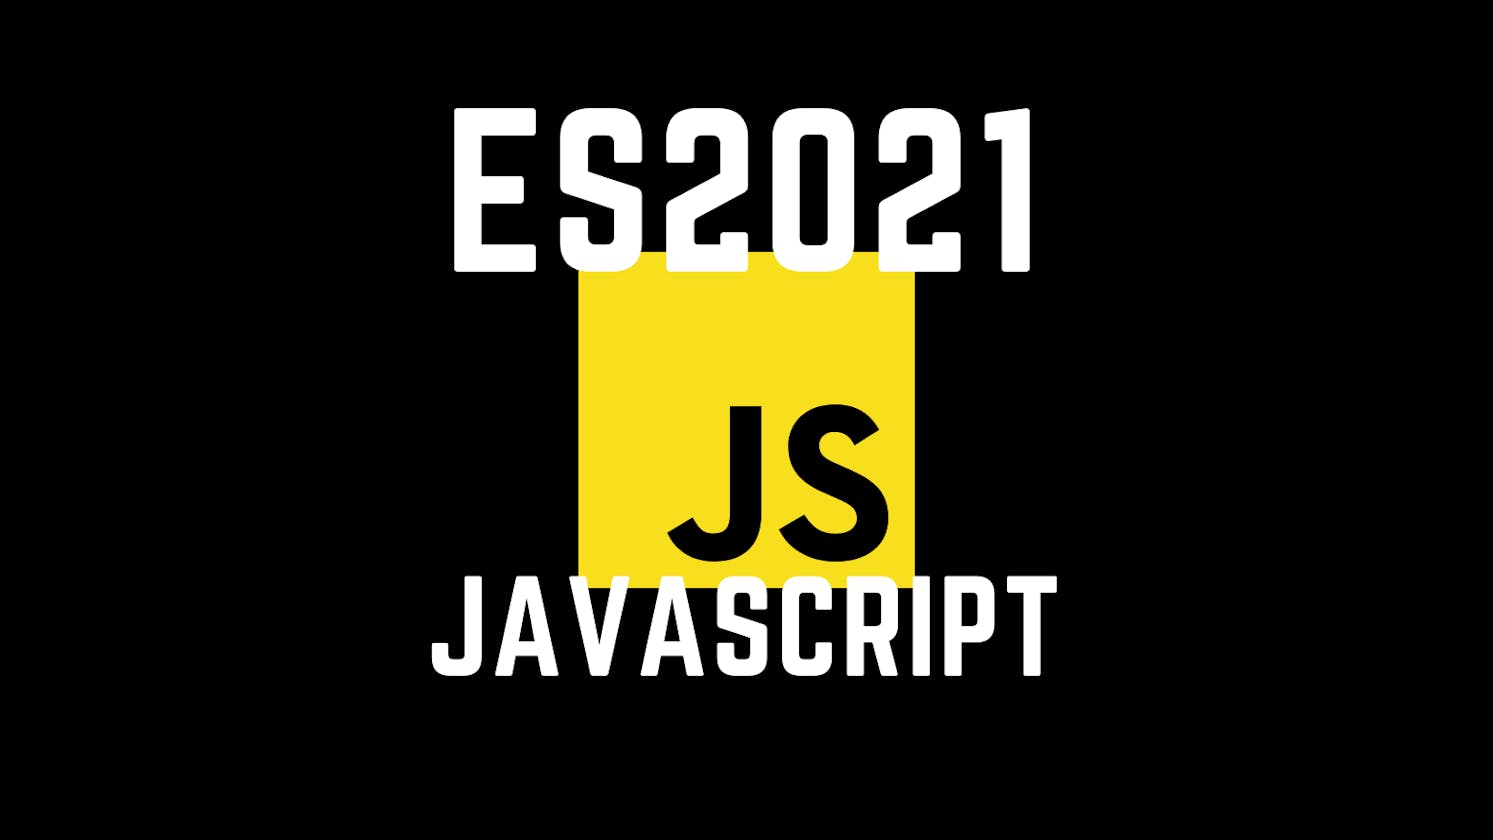 Javascript ES2021 - Features to be included this year in ES12